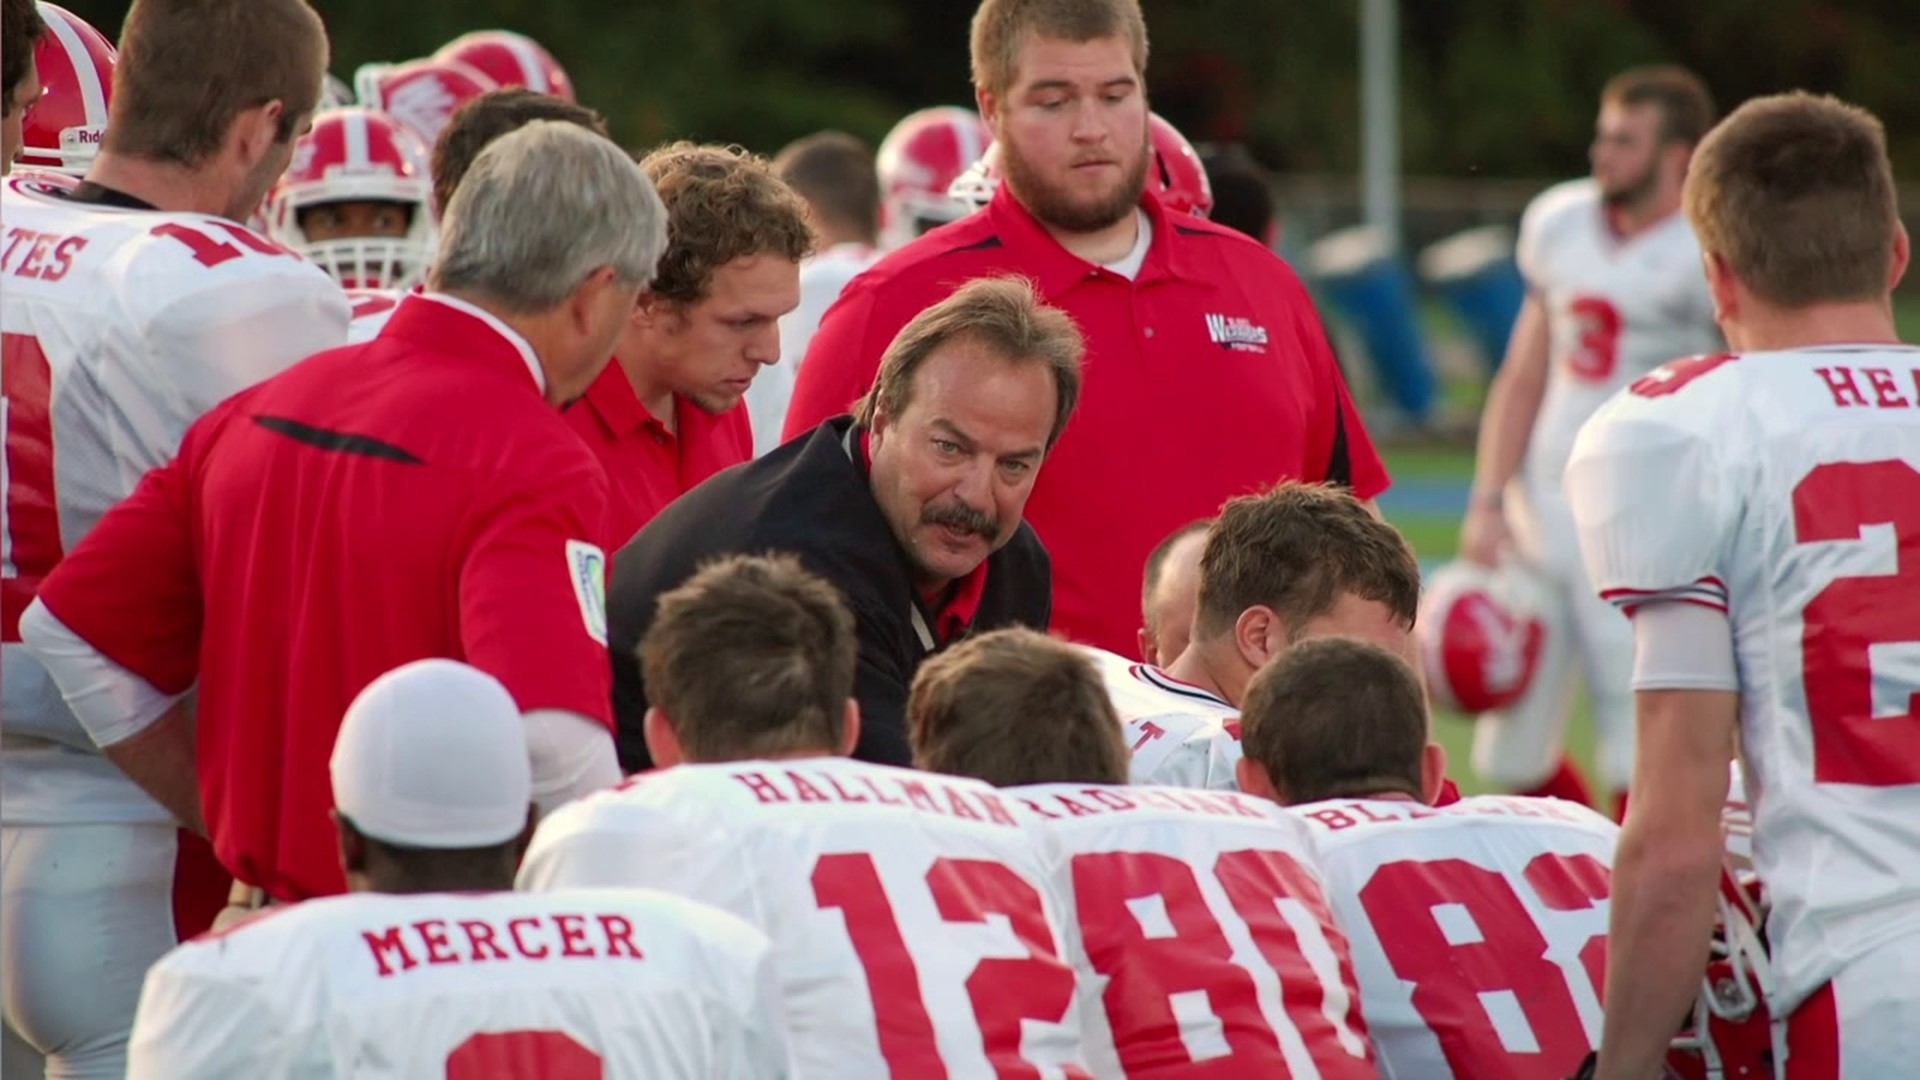 East Stroudsburg University Football Coach Mike Terwilliger is celebrating 500 games.